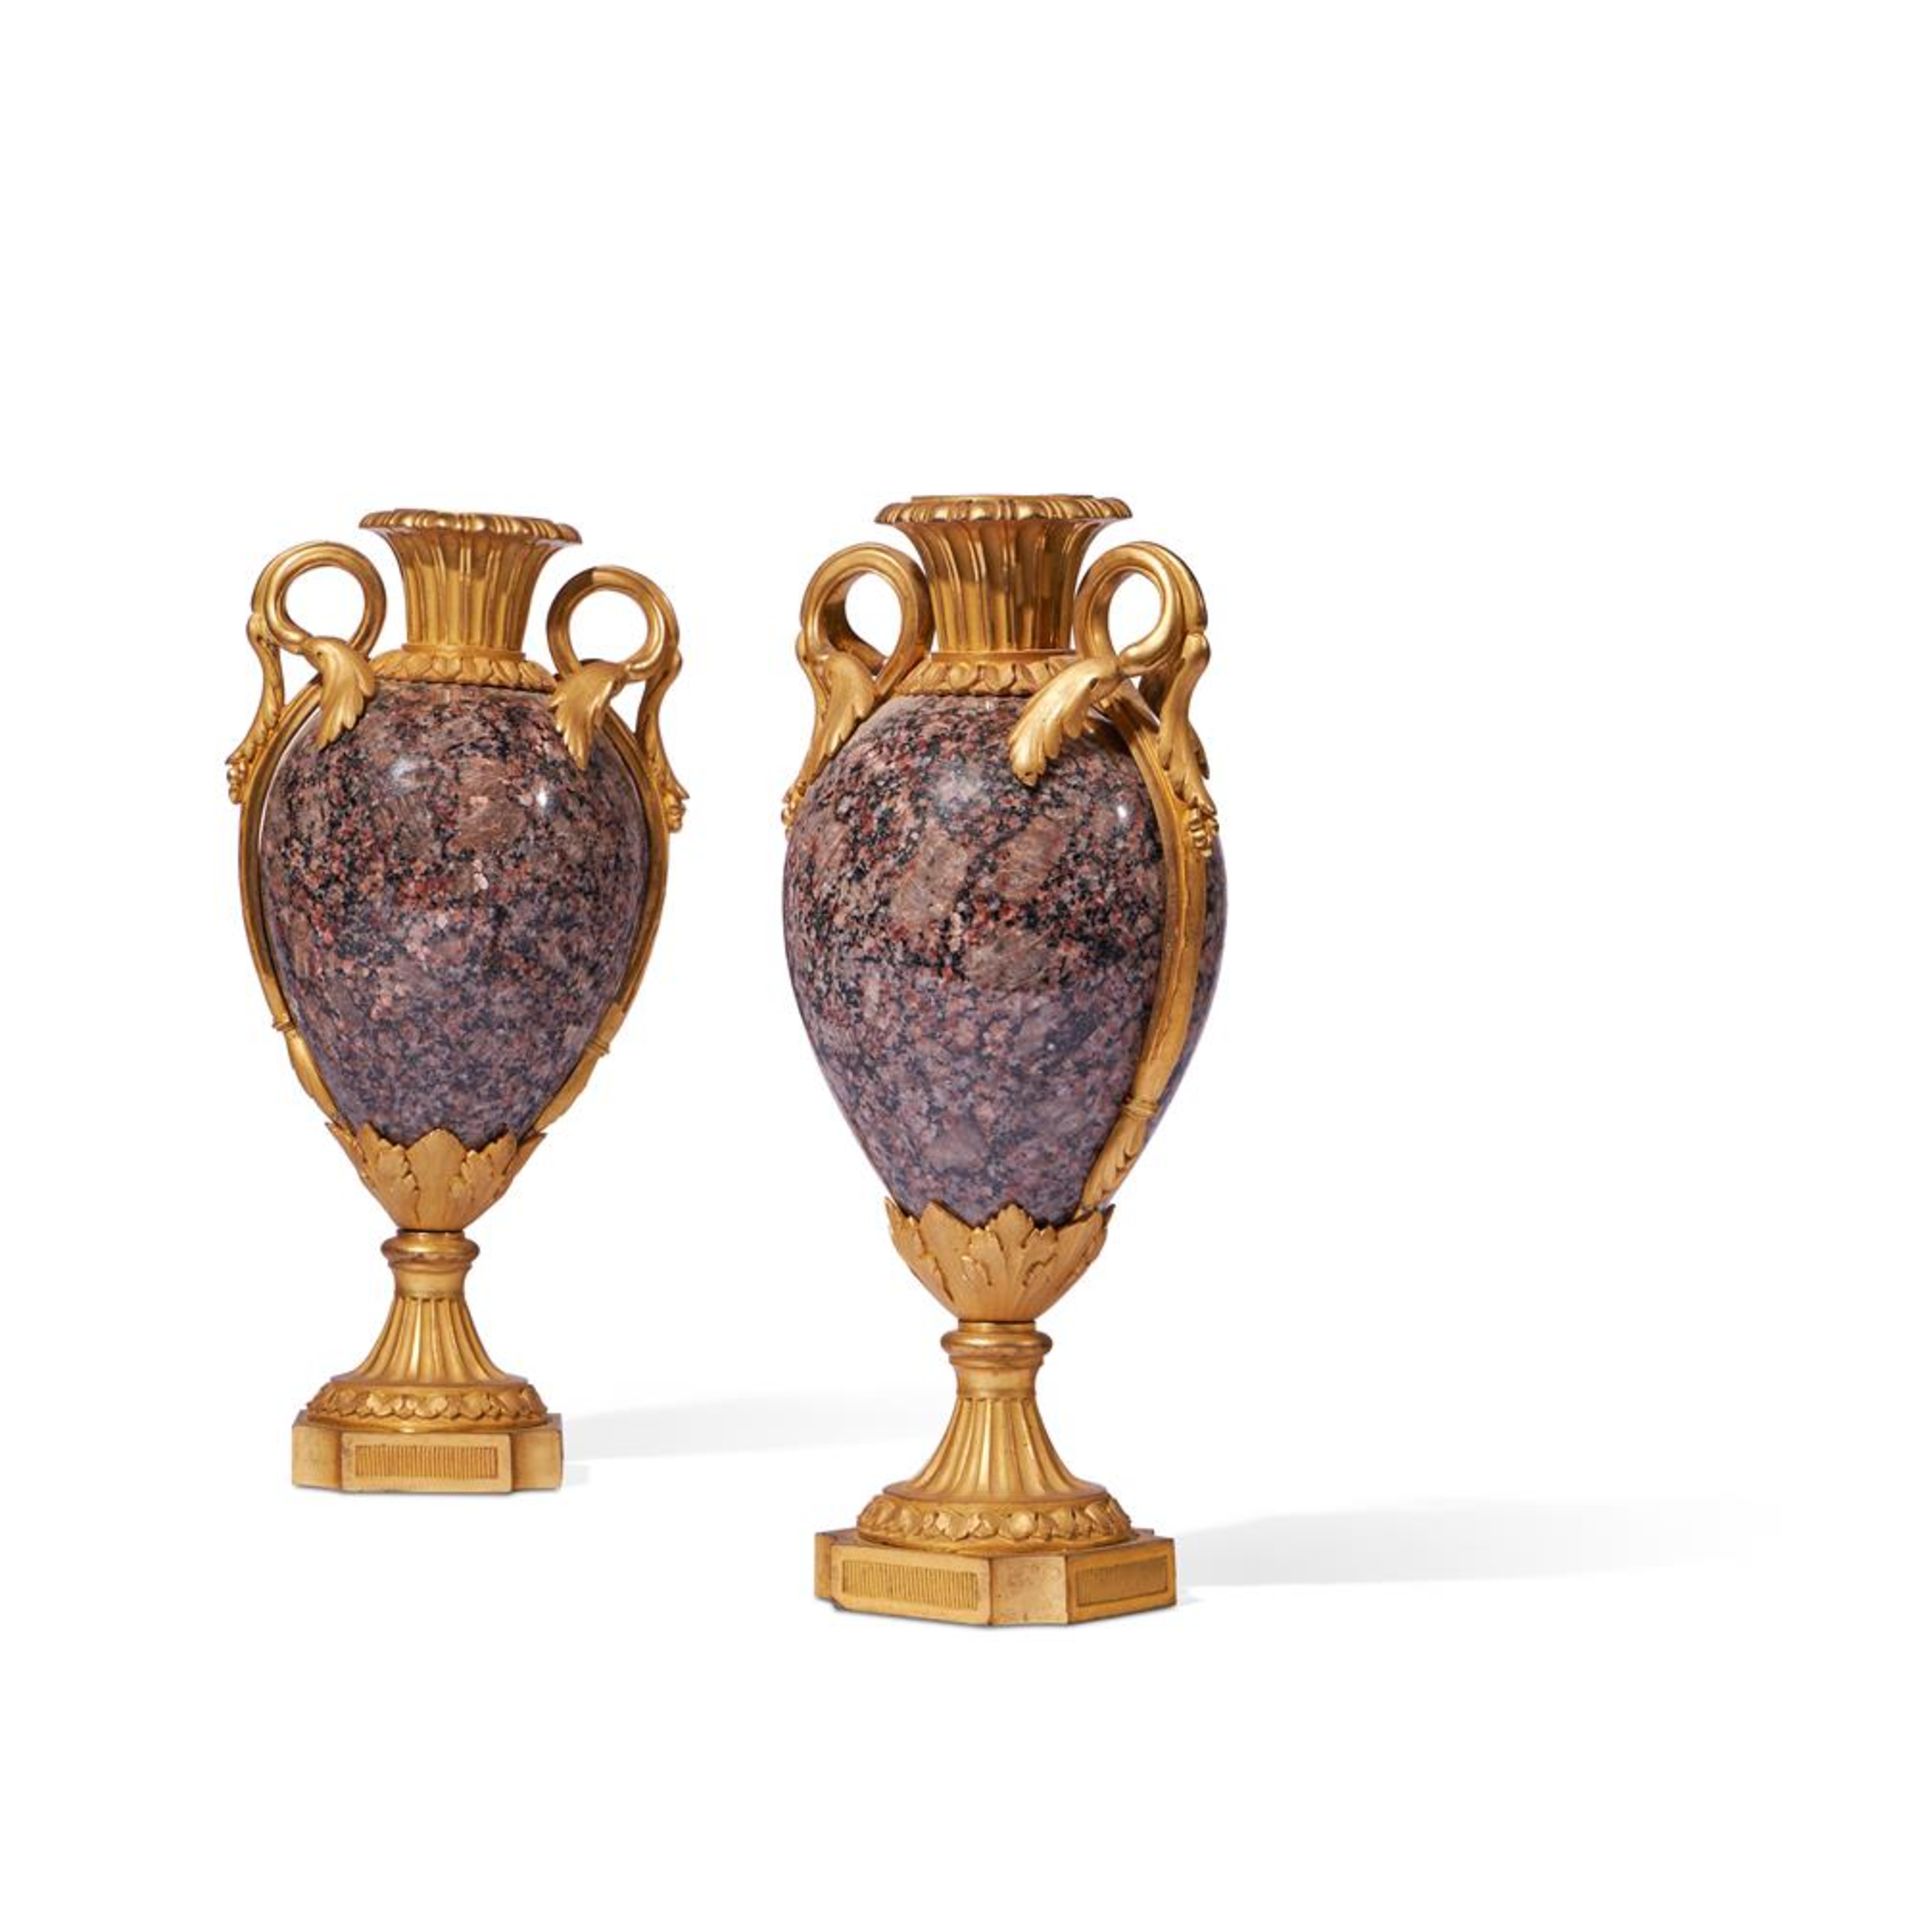 A PAIR OF GILT ORMOLU MOUNTED GRANITE VASES IN THE LOUIS XVI STYLE, FRENCH